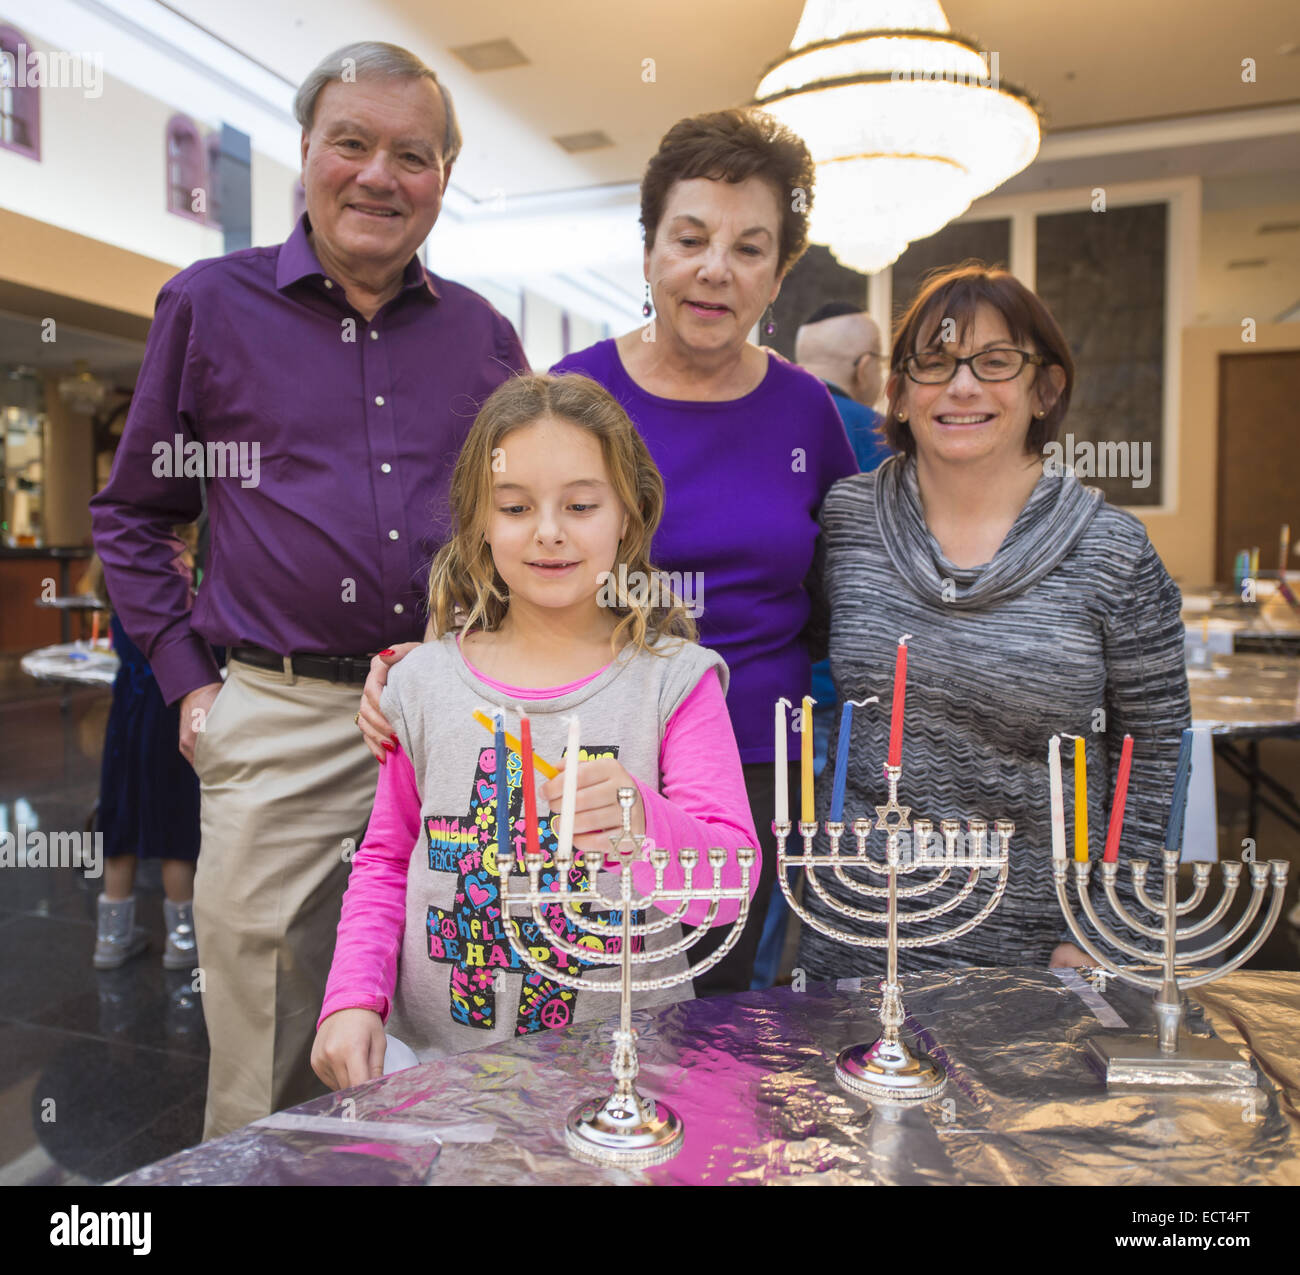 Merrick, New York, USA. 18th Dec, 2014. Granddaughter EMILY MIKOLA, 8, her Grandpa and Grandma BLOOMFIELD, and (at far right) their friend MARCI SILVERMAN, each get a menorah ready when the Merrick Jewish Centre attemps to regain the Guinness World's Record for Most Menorot Lit in One Place at One Time that the congregation held in 2011. On the third night of Hanukkah, the 'Light Up the Night 2 - Bringing the Record Home' event also included a ceremonial candle lighting in the main santuary. Though the Menorah Lighing goal to light at least 1,000 menorot was missed, and the record w Stock Photo